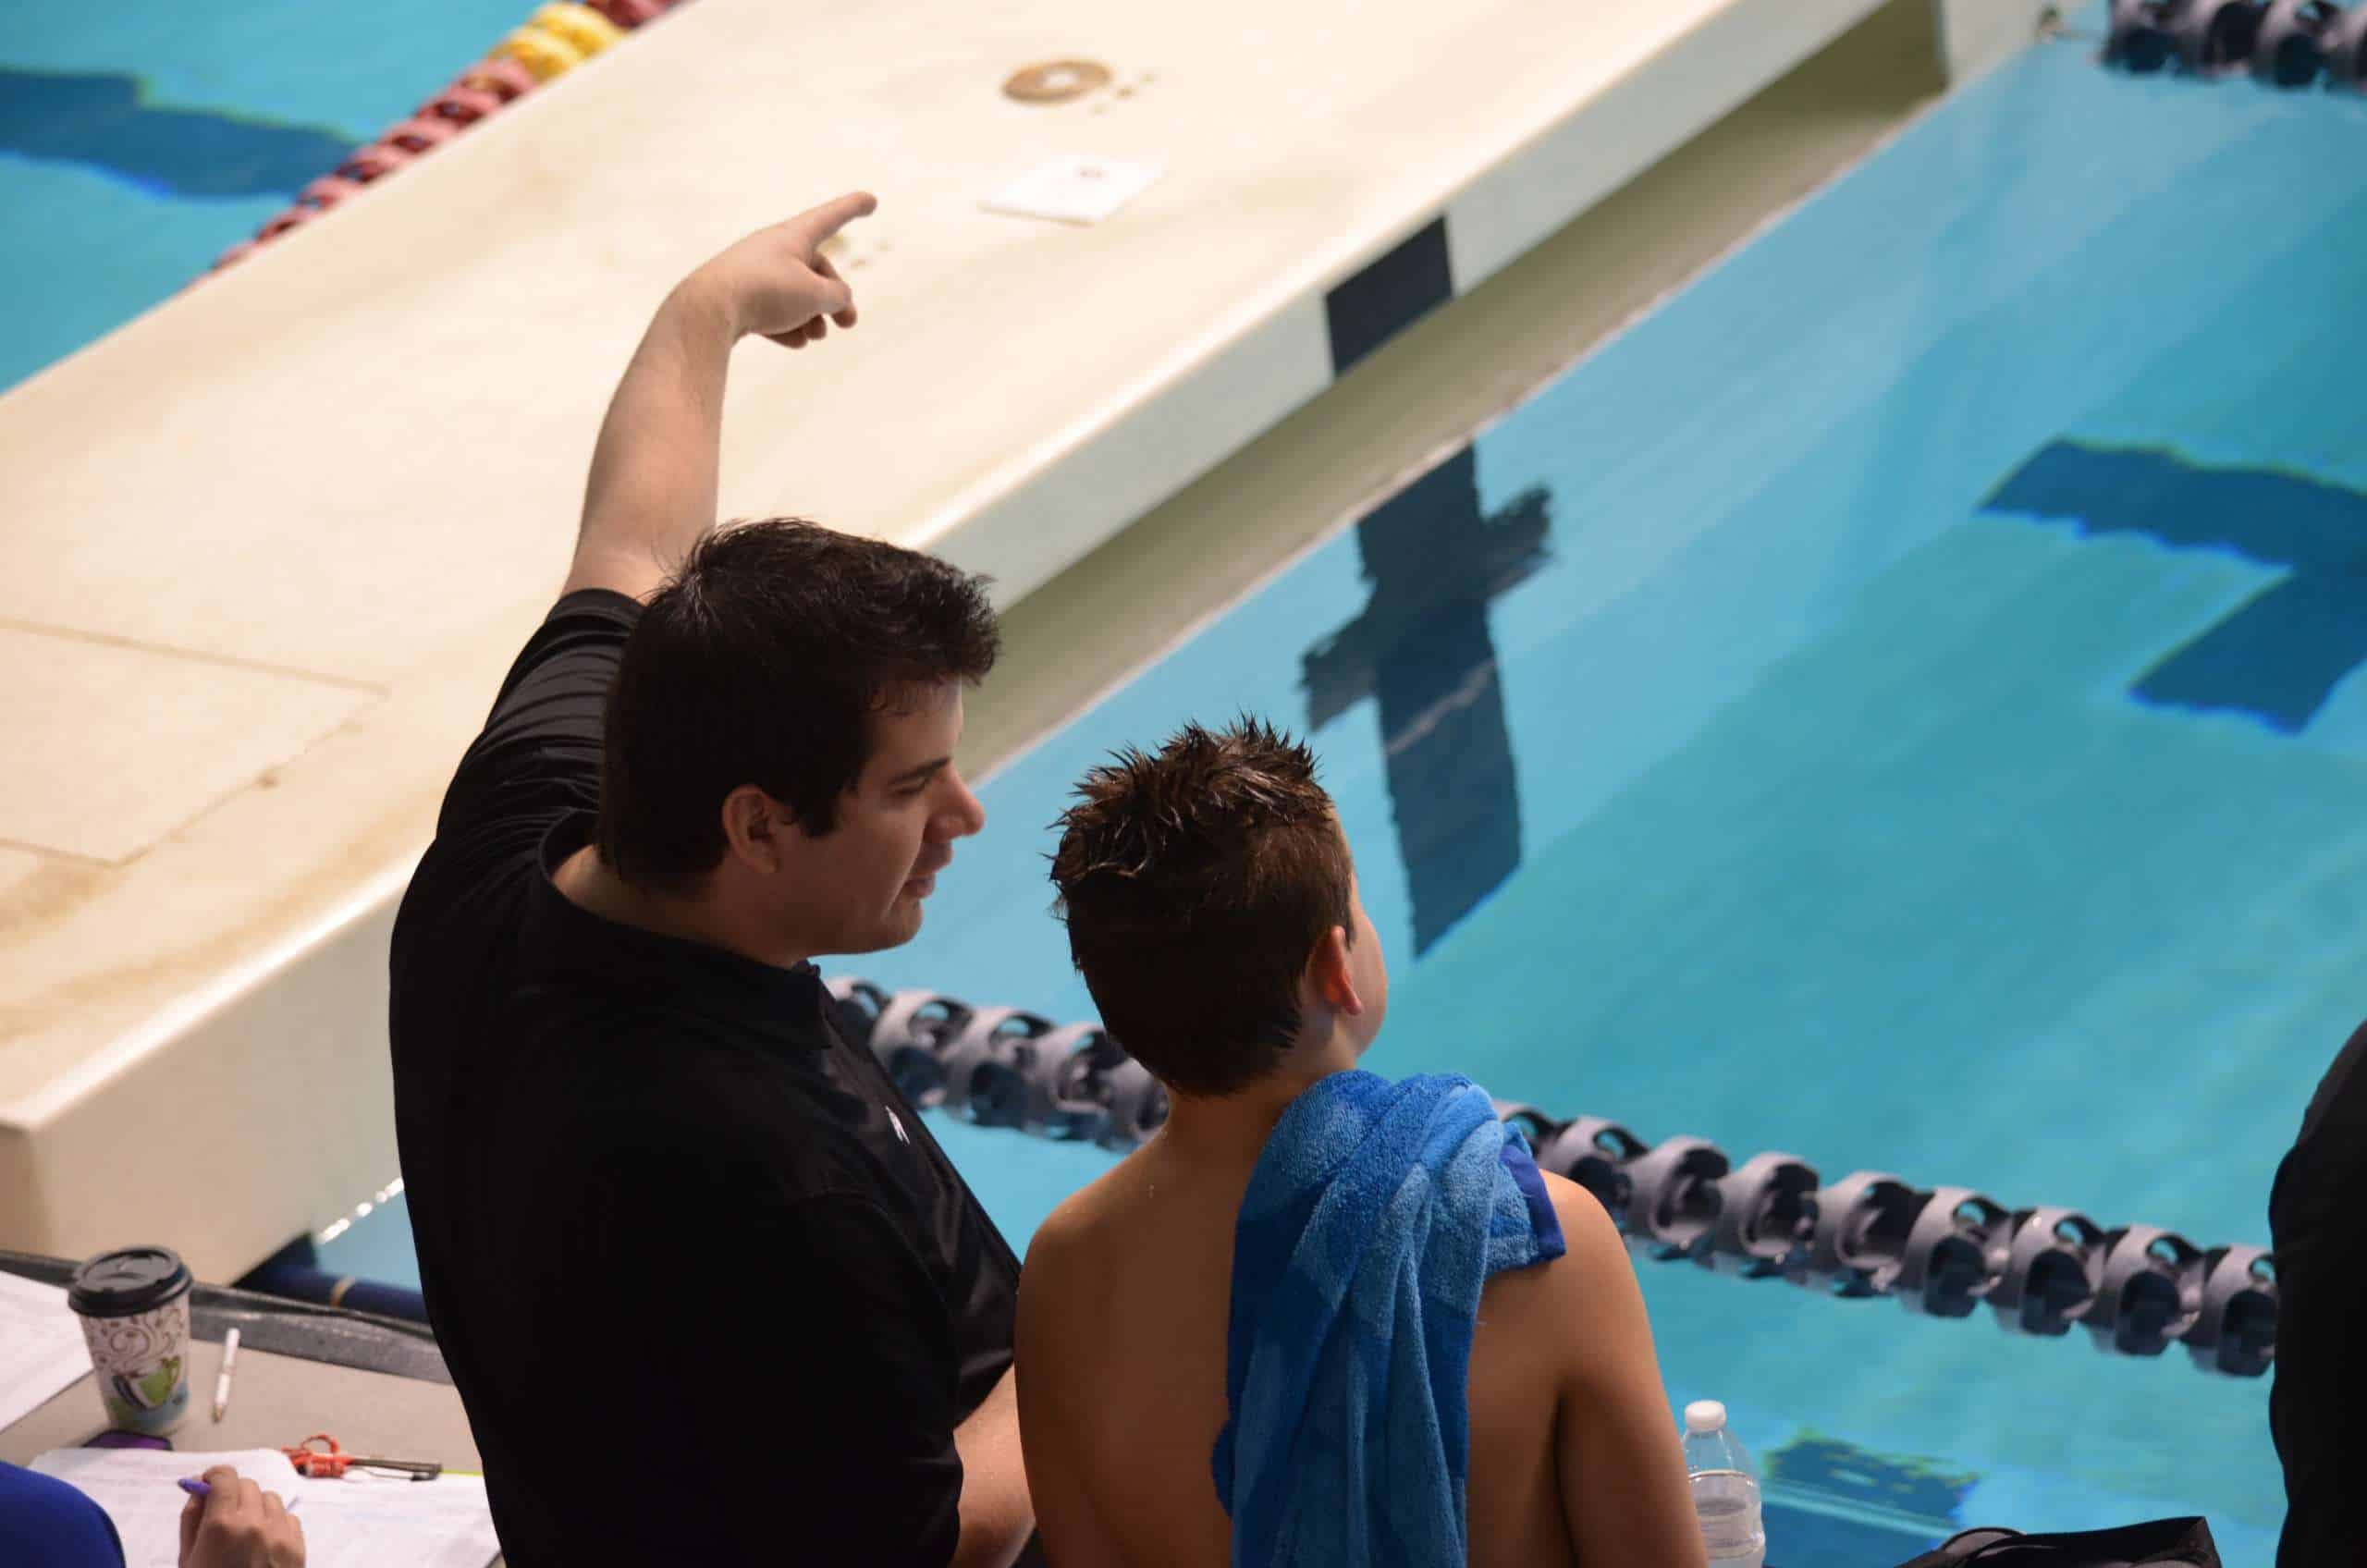 The role of the coach in the development of the young athlete